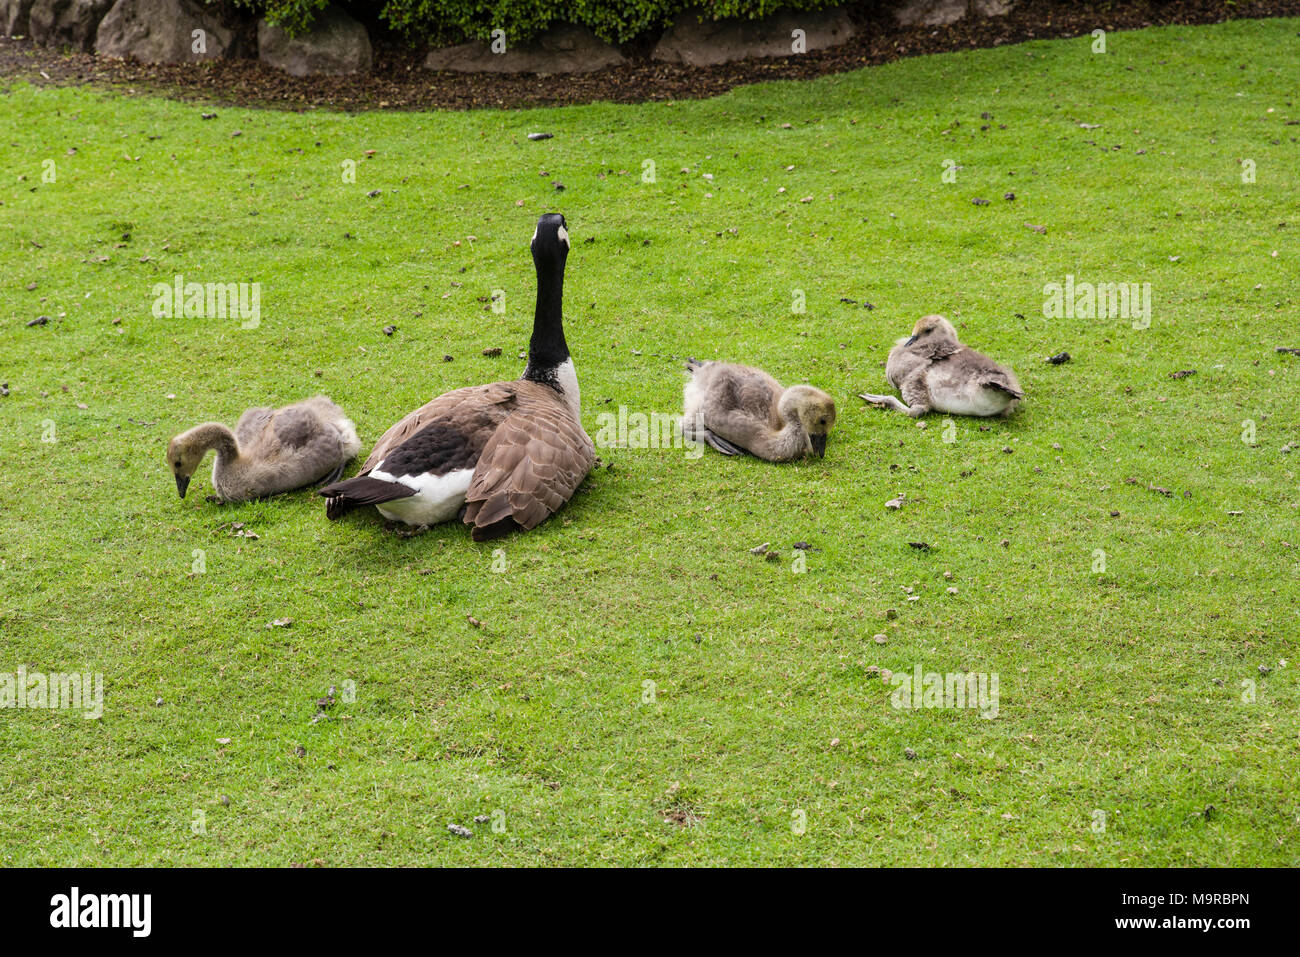 Canada Goose with three goslings resting in a green grassy area. Stock Photo